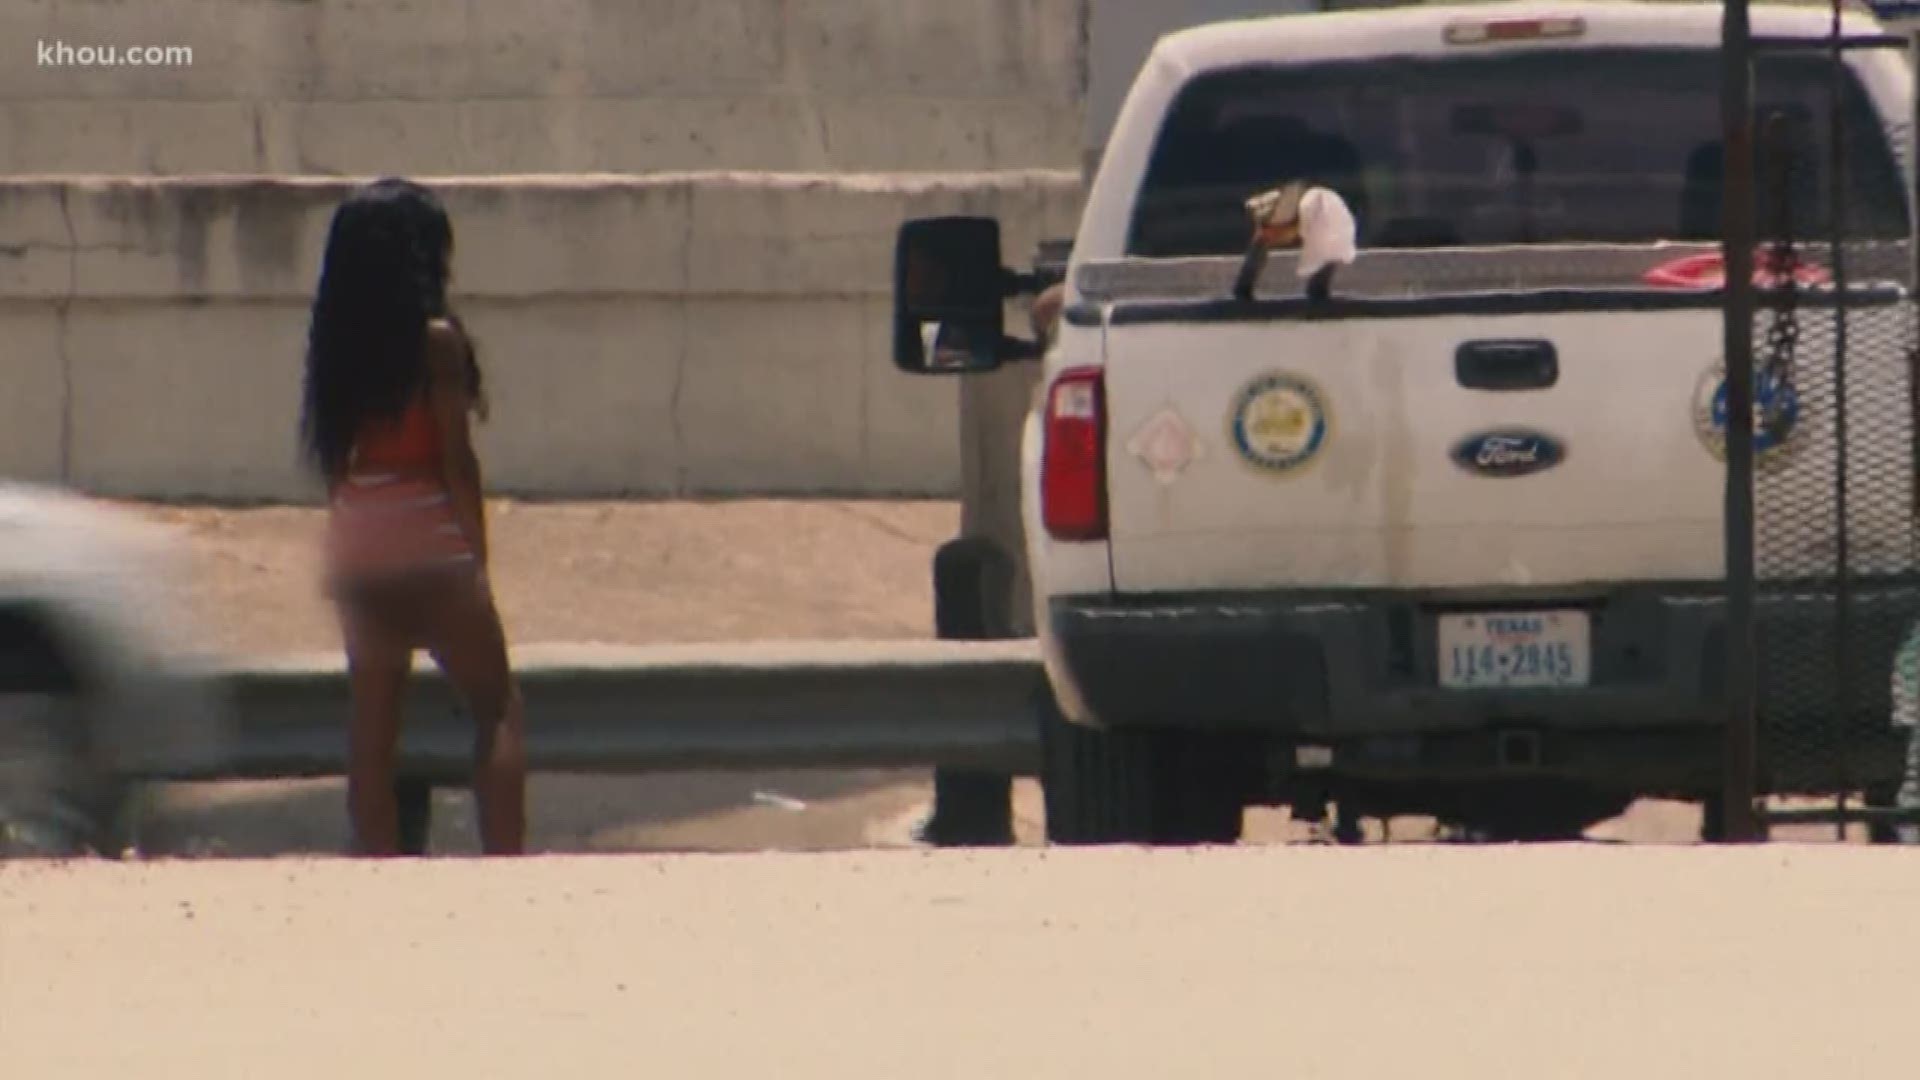 Two Houston Public Works employees are without a job after KHOU 11 Investigates caught them on camera in a prostitution hotspot the same day officials announced a crackdown on crime in the area.